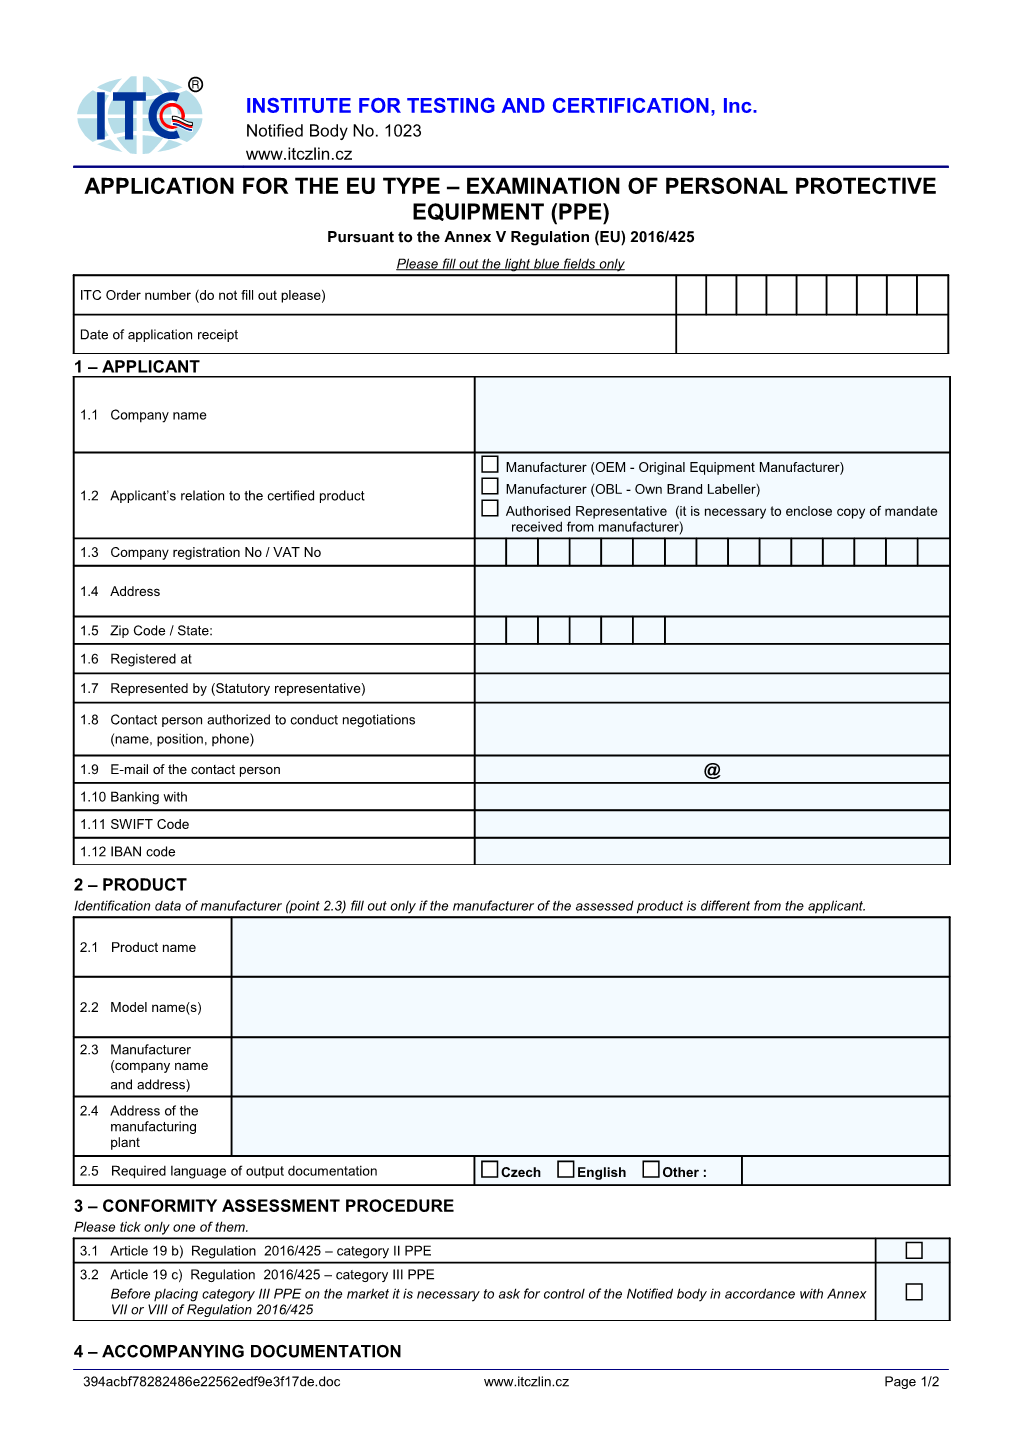 Application for the Eu Type Examinationof Personal Protective Equipment (Ppe)